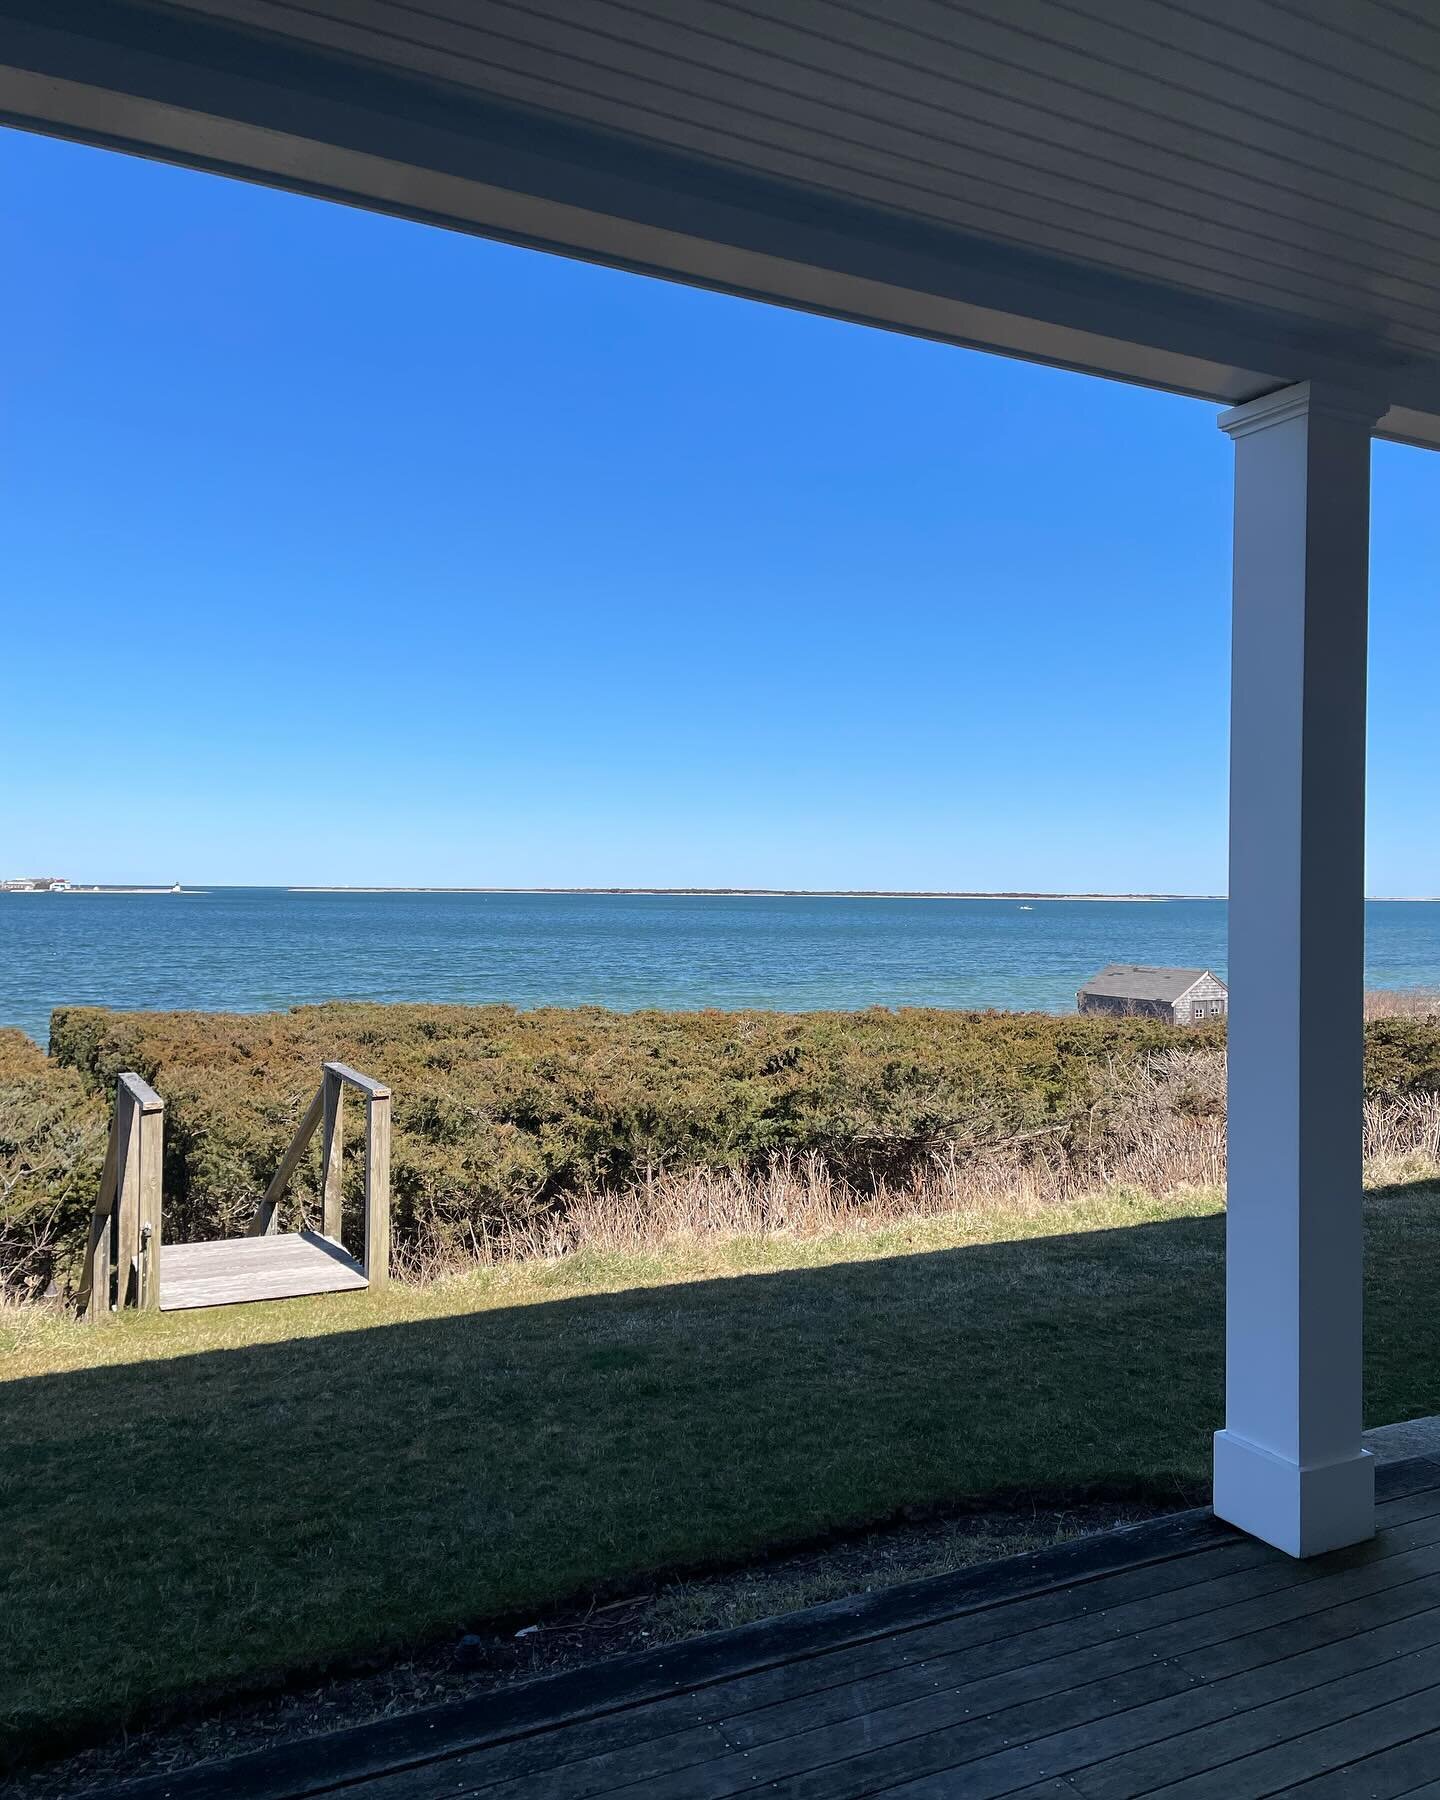 Nice to spend time in a home we renovated 20 years ago&hellip; time to spruce her up for the next 20 years.  #nantucket #interiordesign #renovationproject